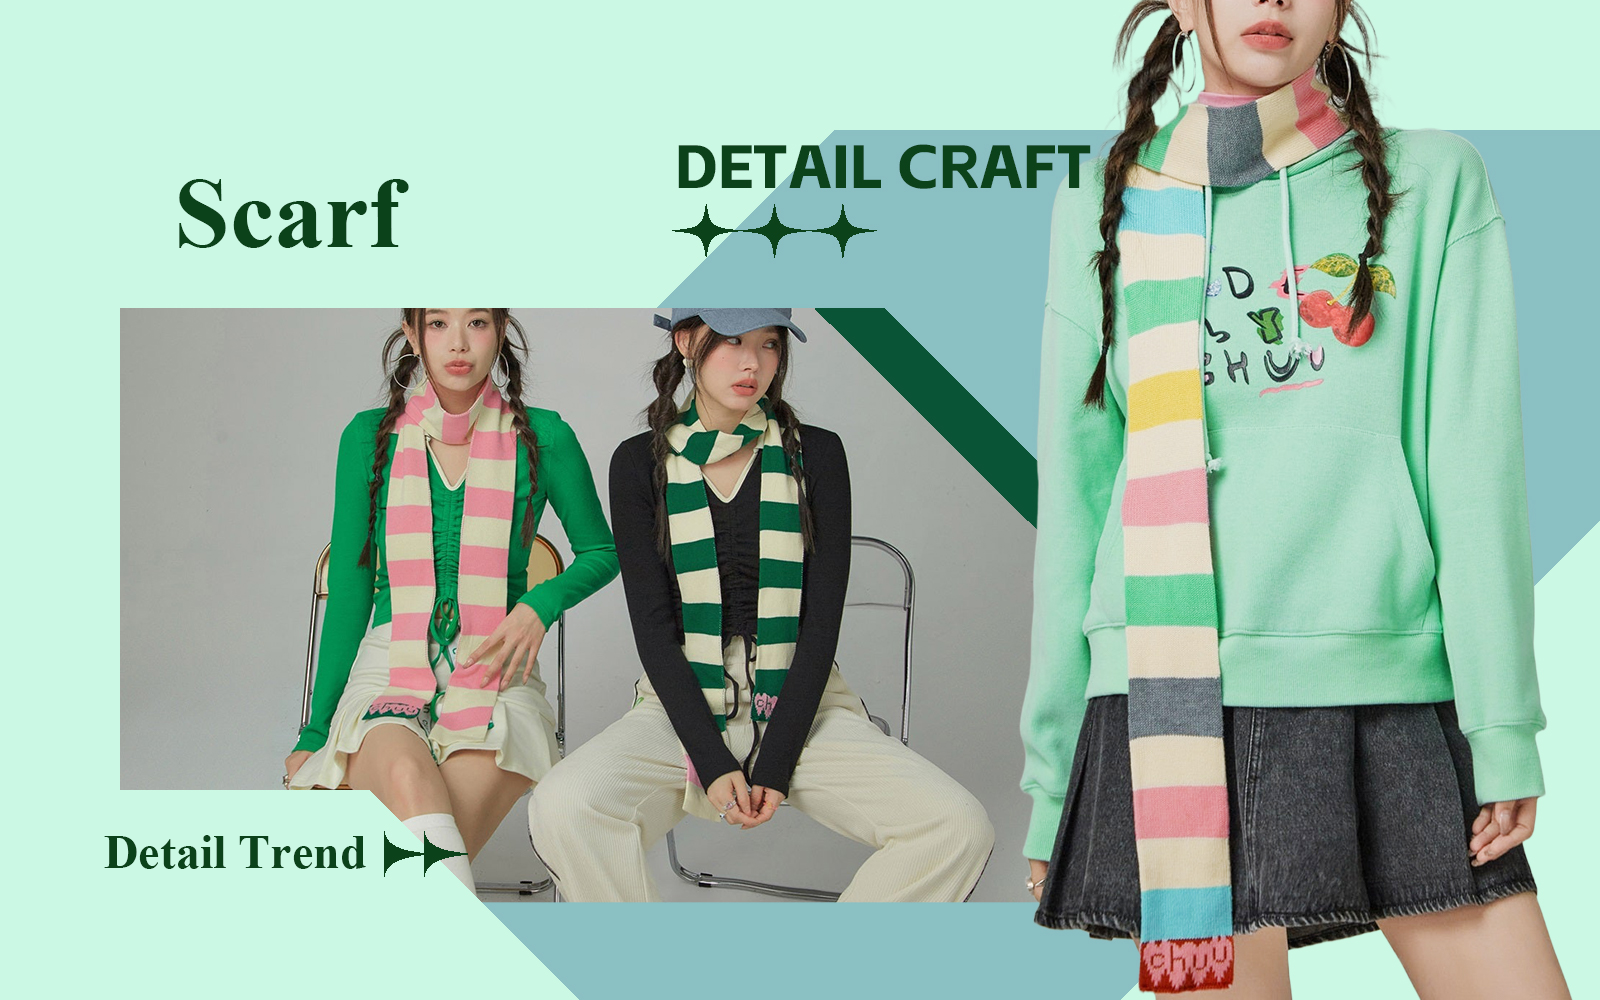 The Detail & Craft Trend for Scarves